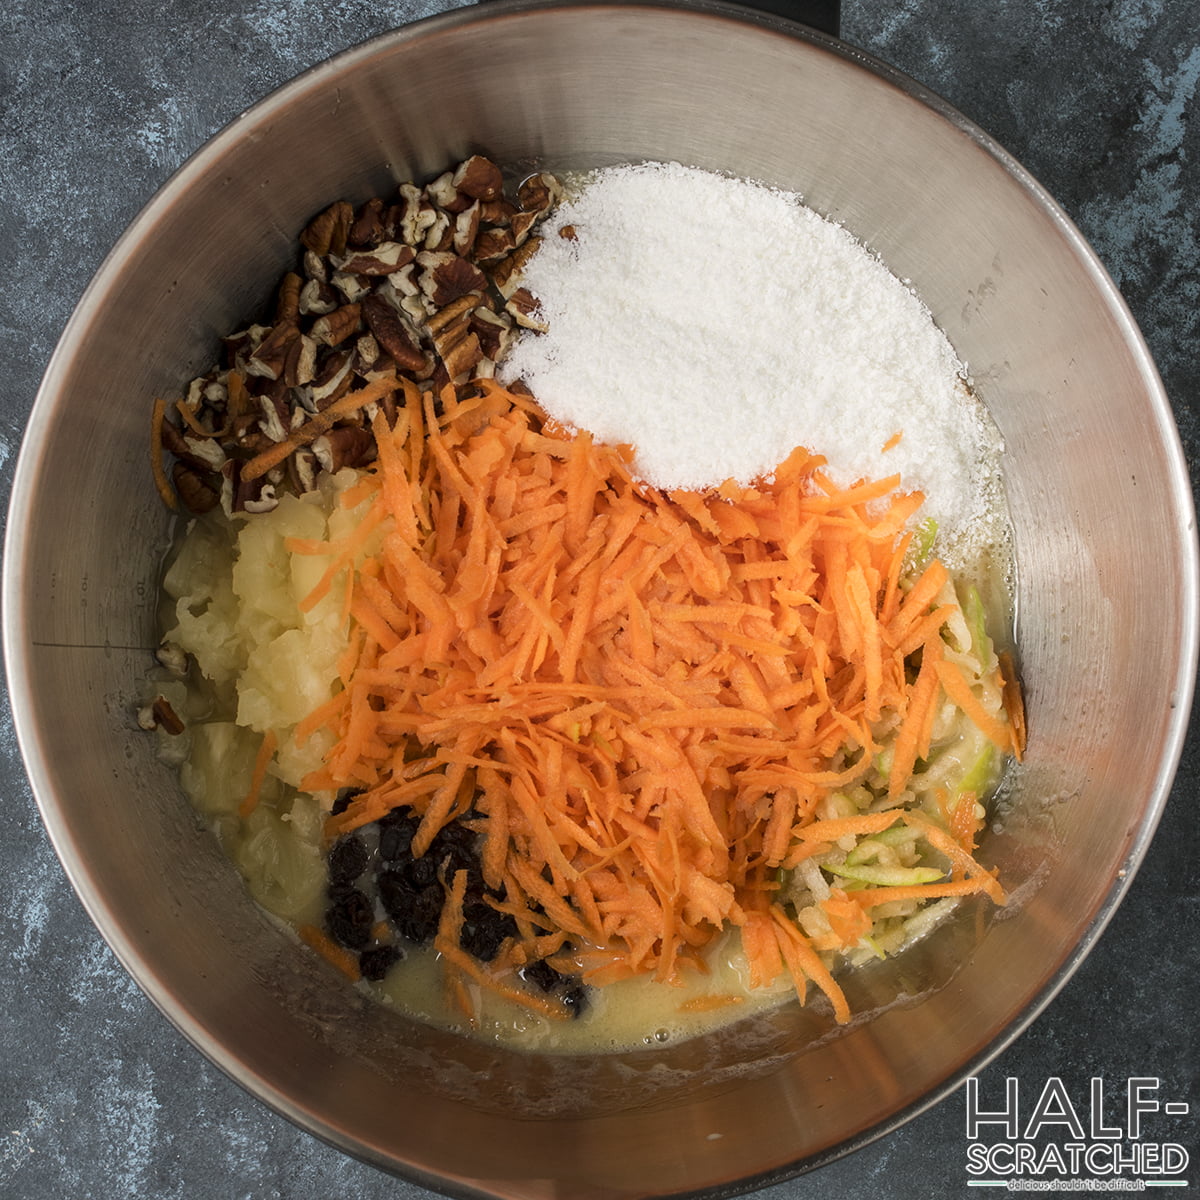 Wet ingredients mixed with carrots, pineapple, and pecans in a bowl